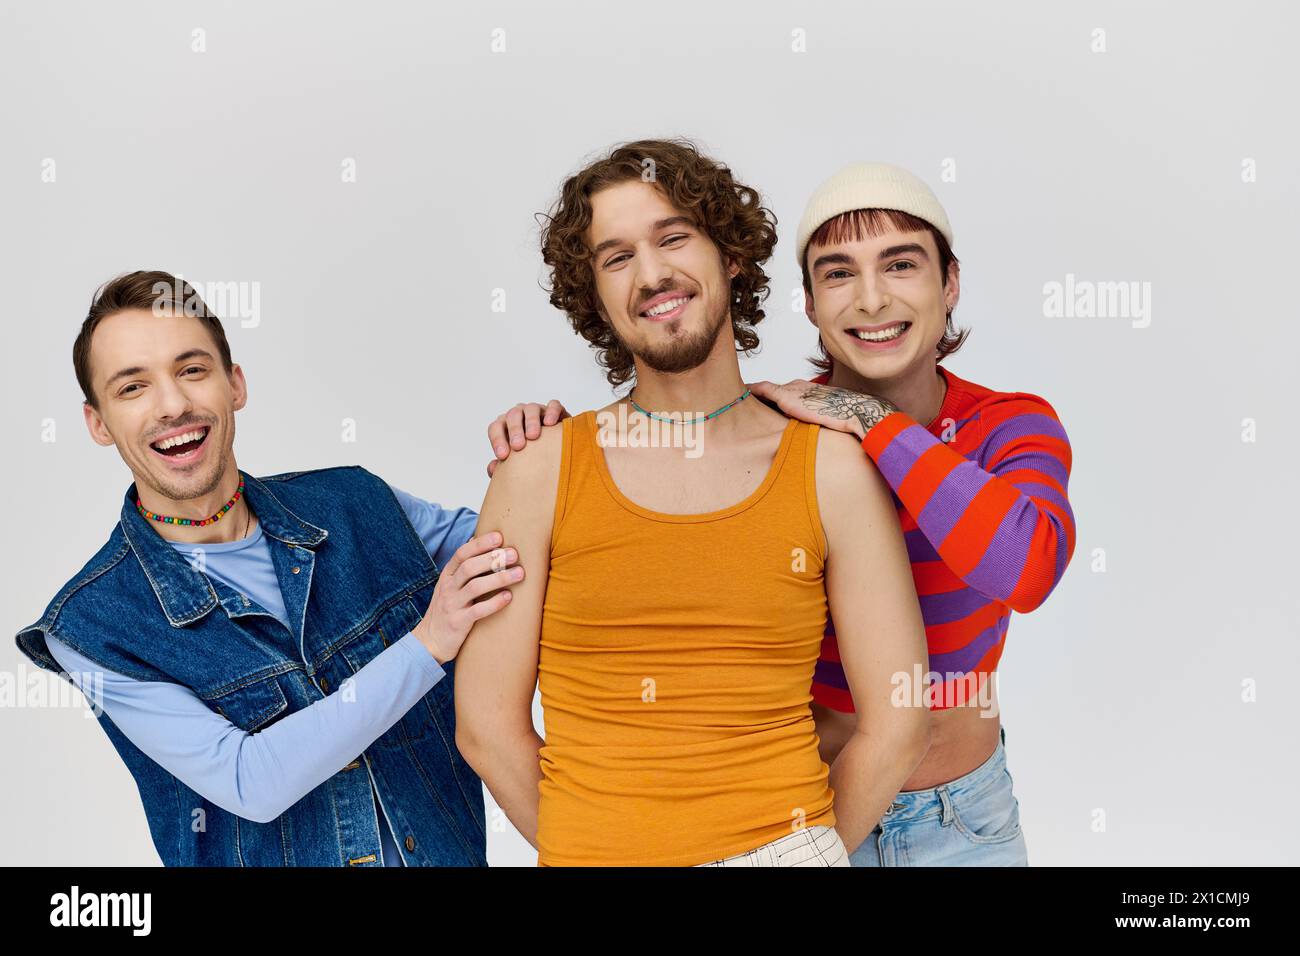 cheerful young gay men in vibrant attires posing together on gray backdrop and looking at camera Stock Photo